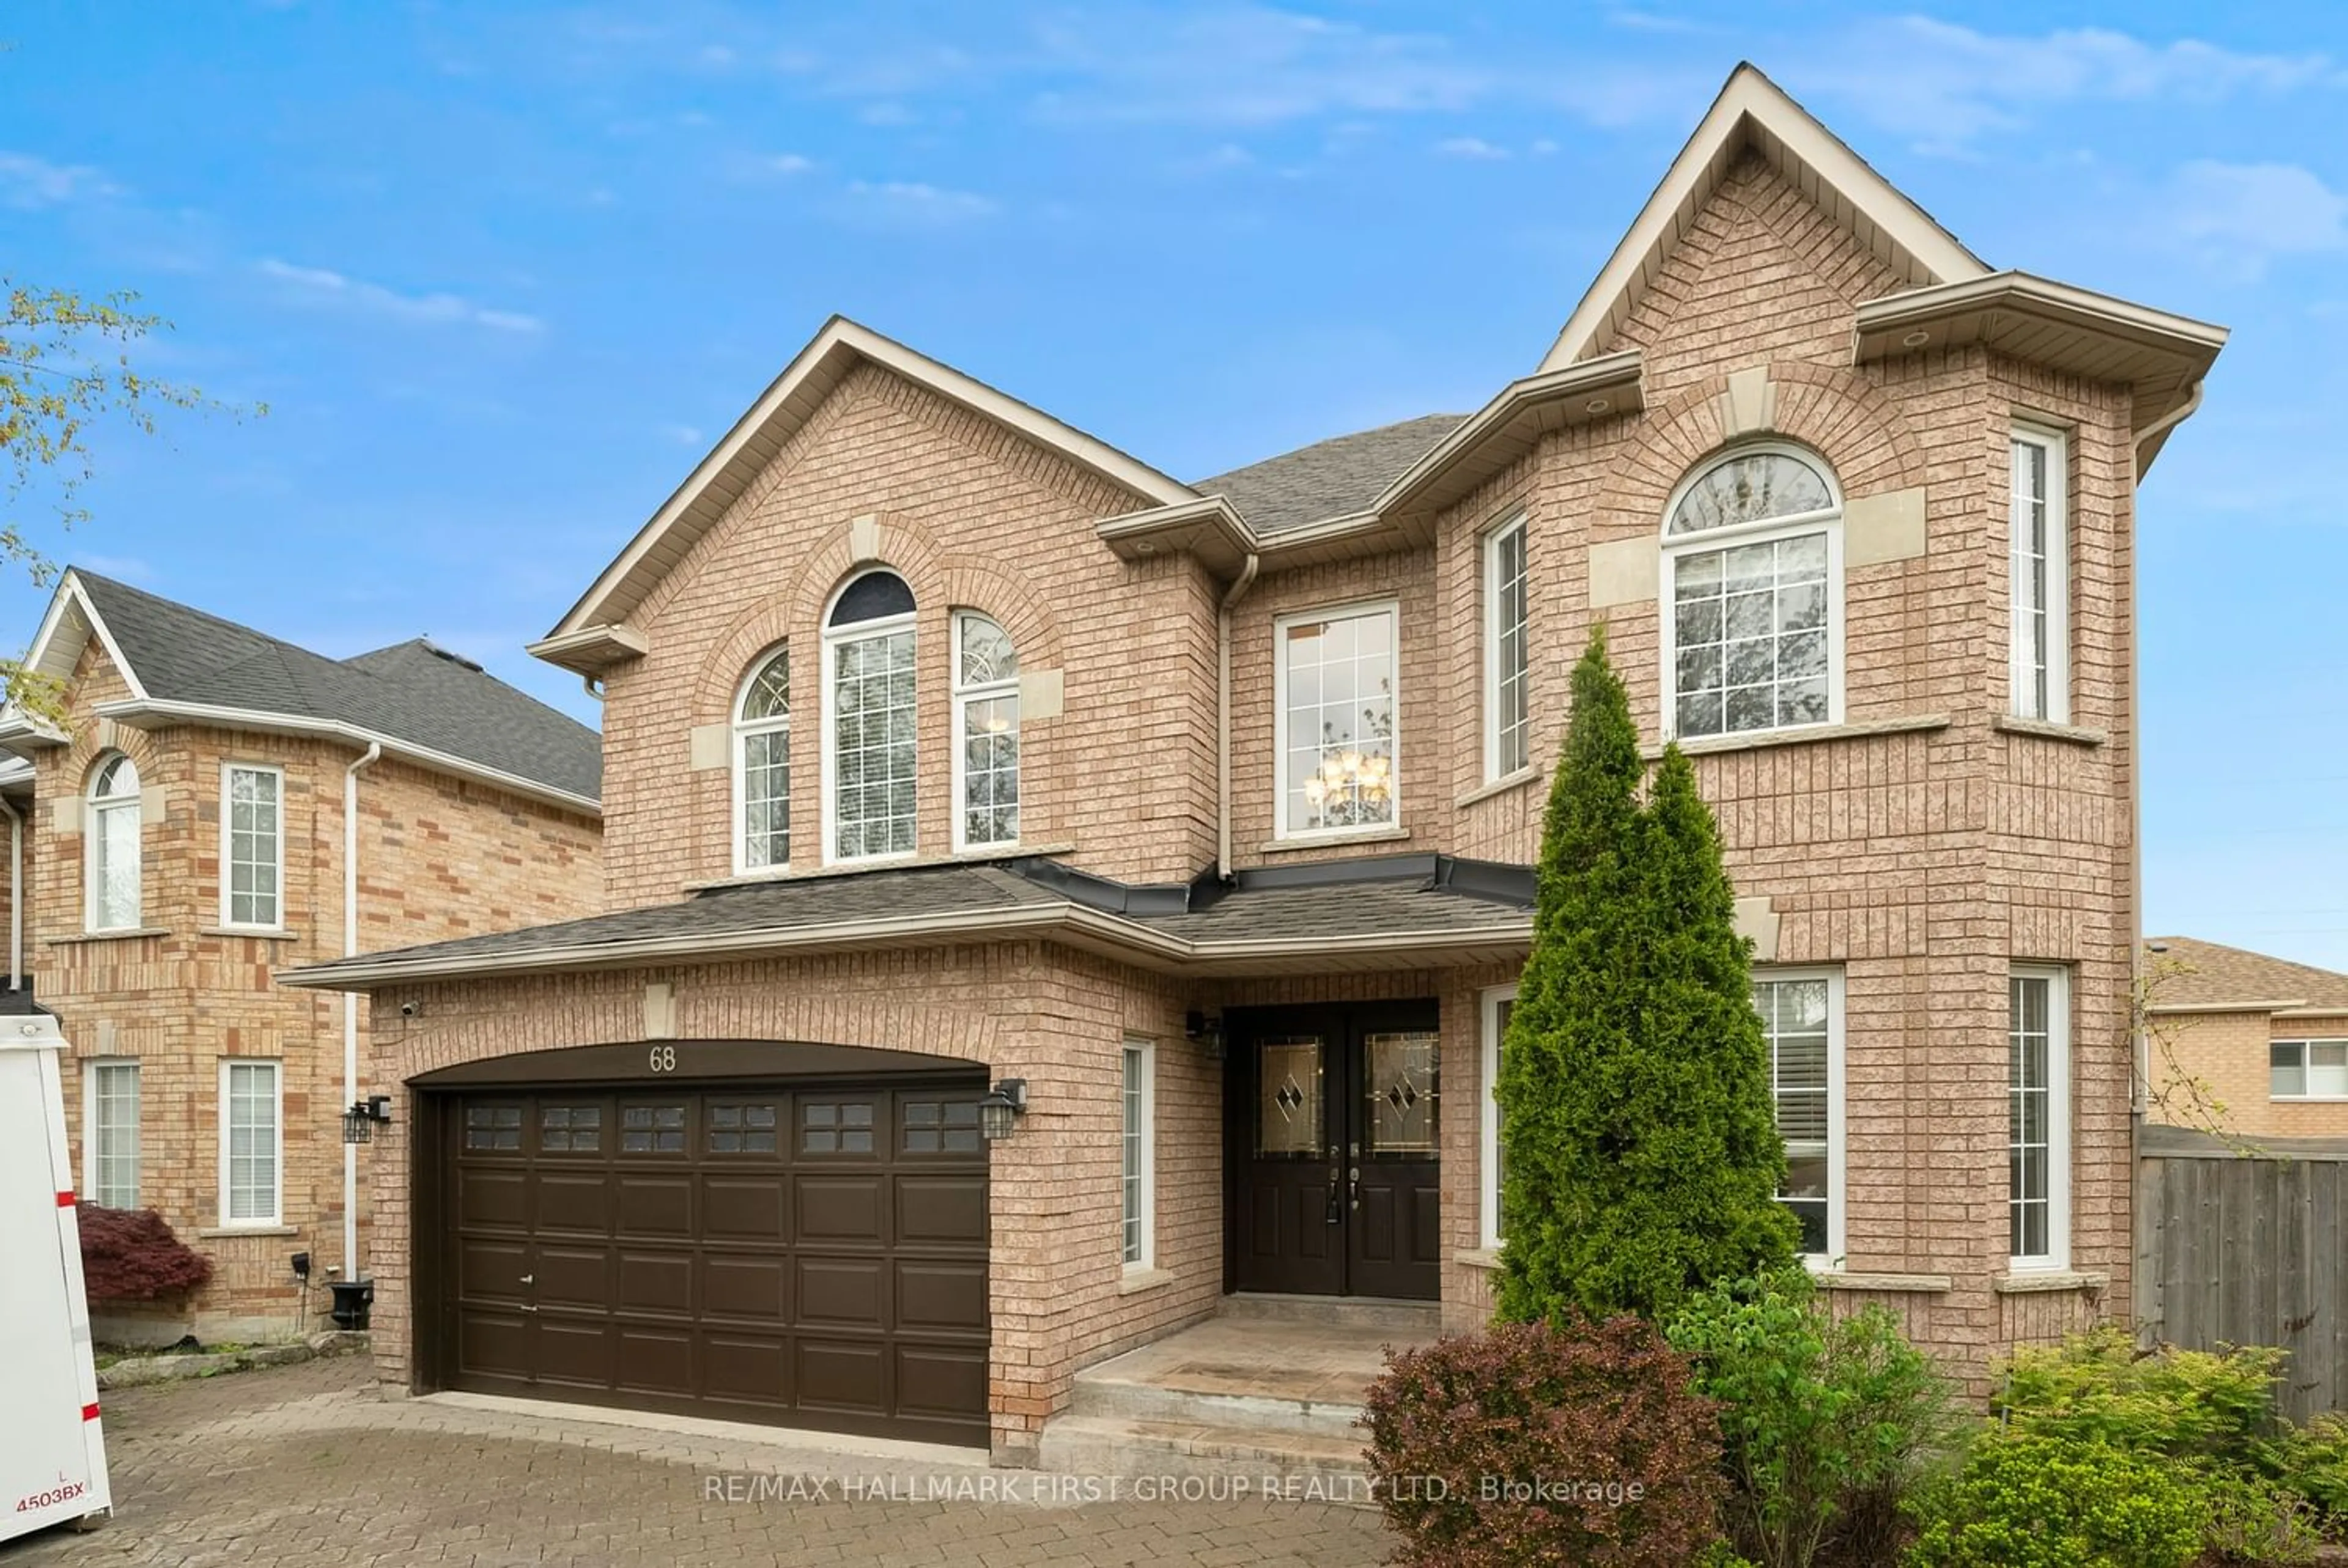 Home with brick exterior material for 68 Mendocino Dr, Vaughan Ontario L4H 1T6